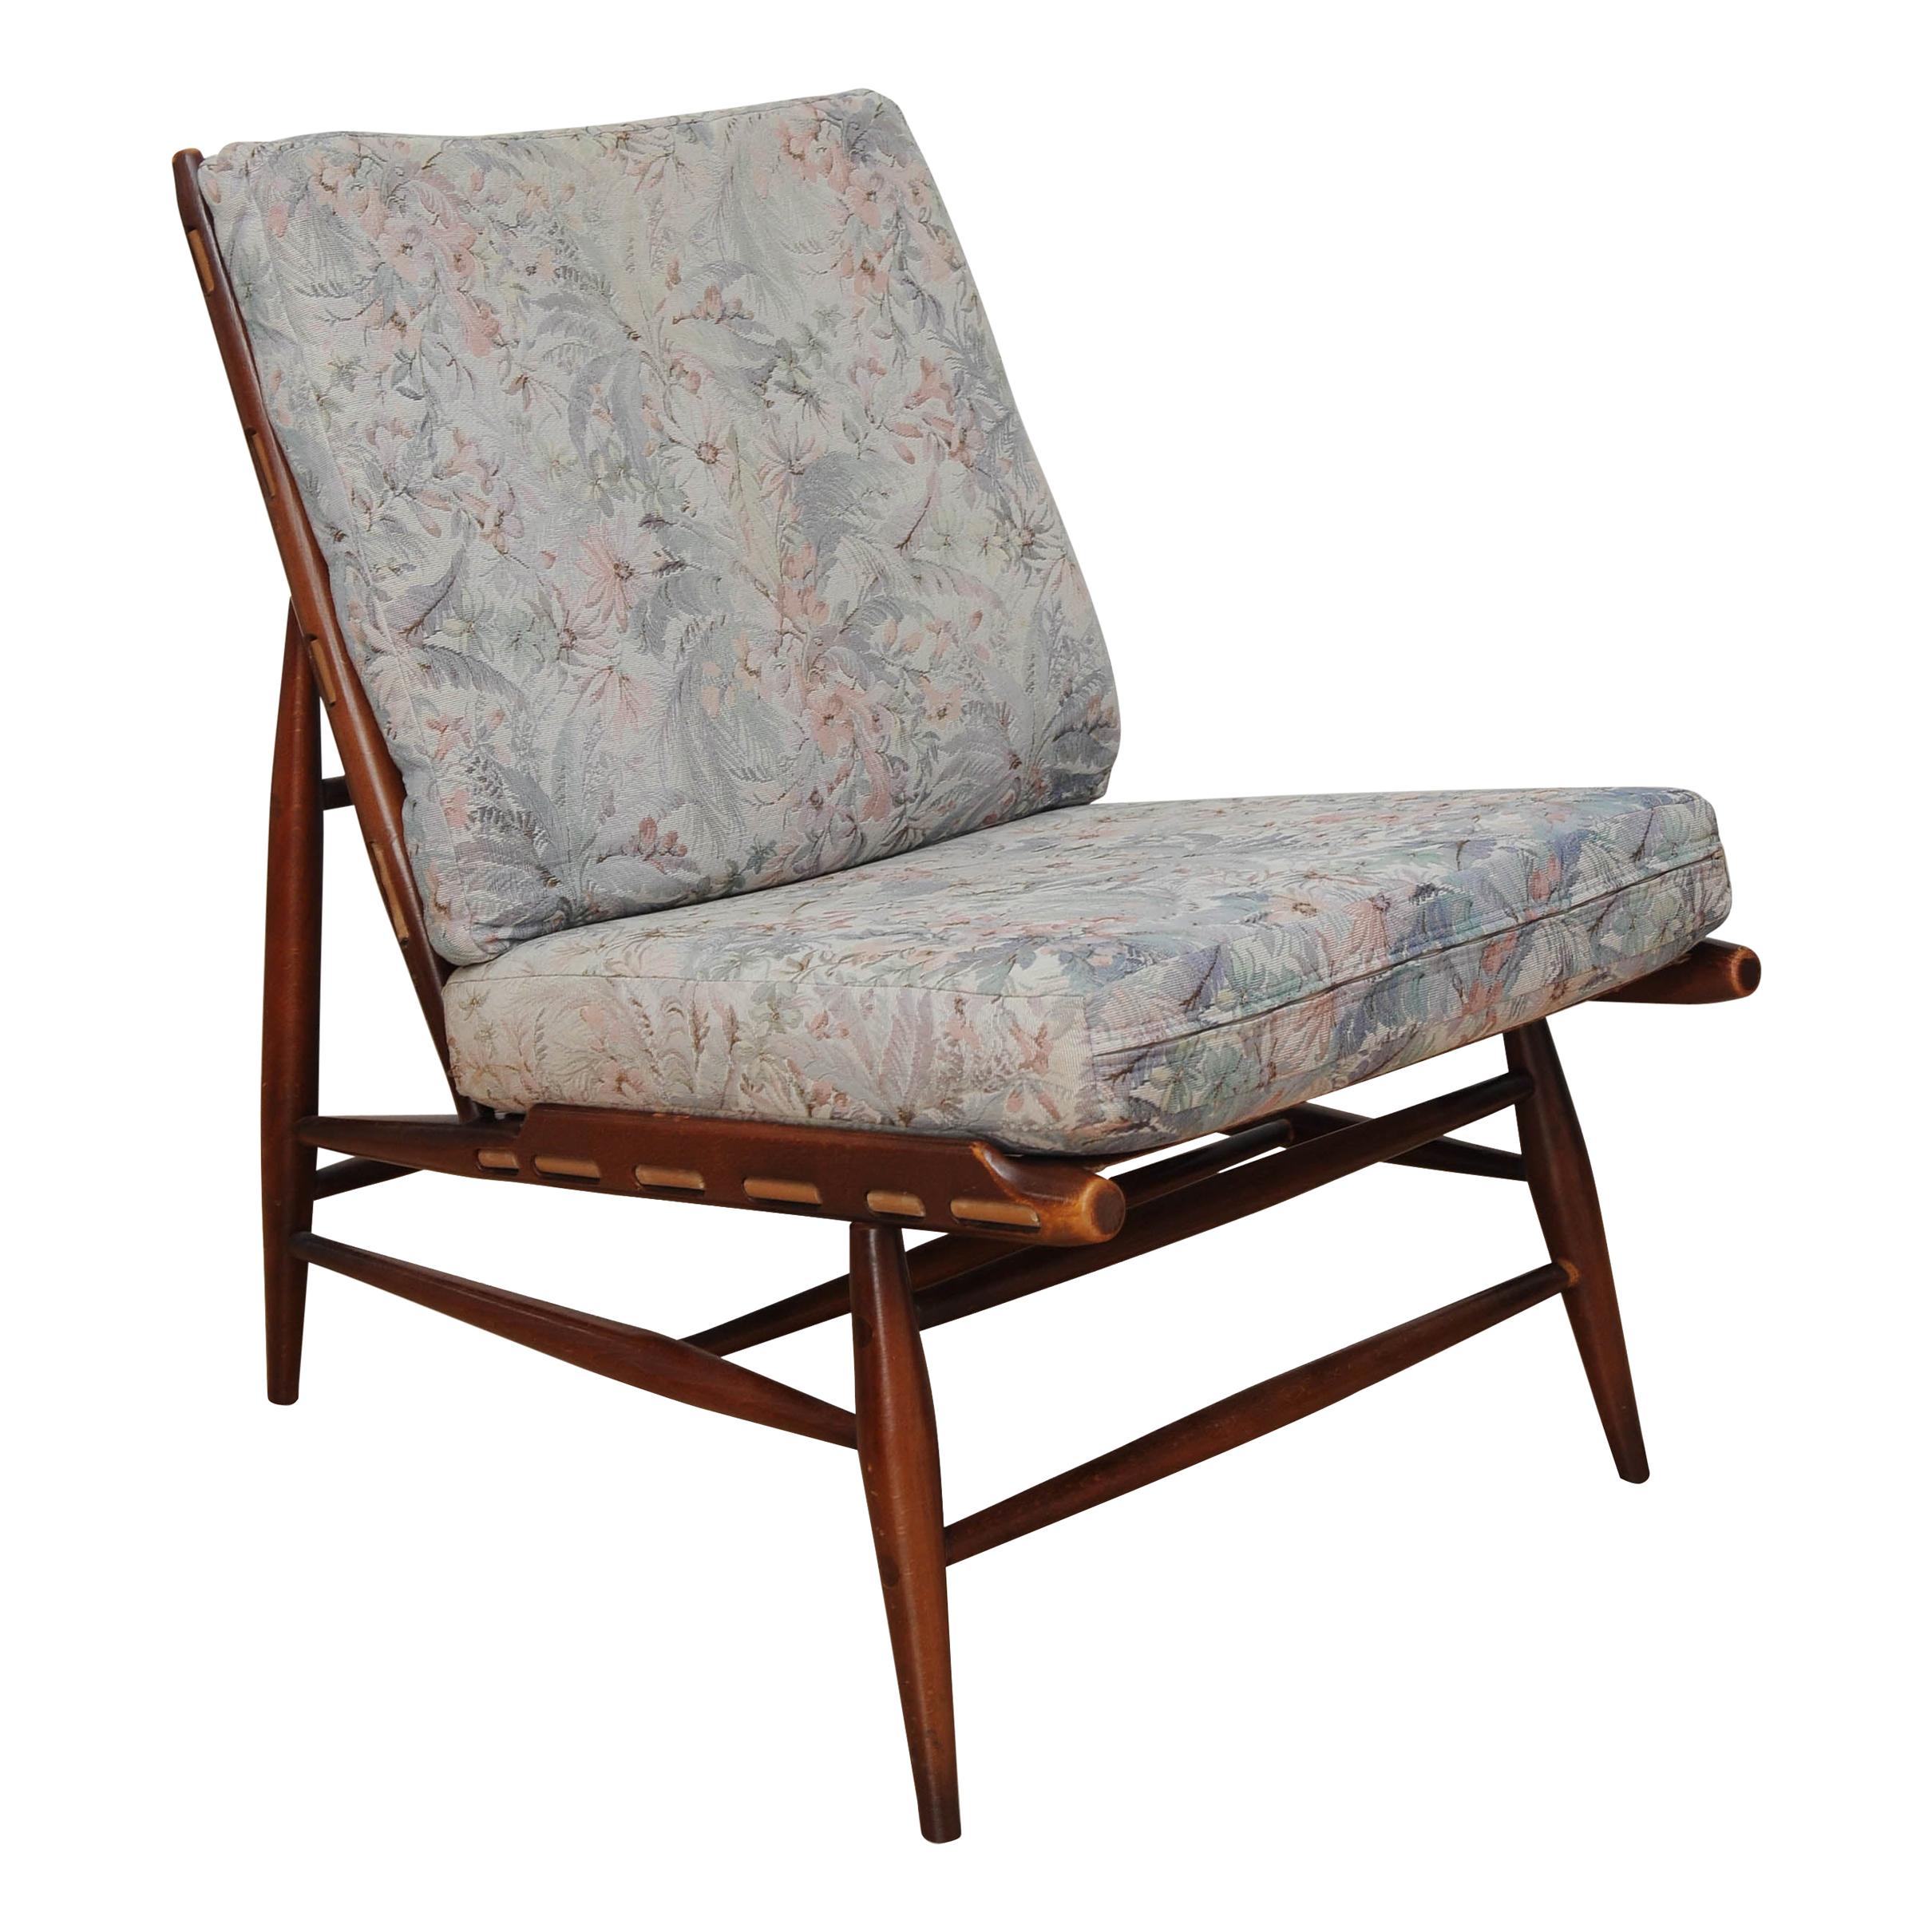 Ercol 427 Lounge Chair with Original Upholstery and Original Ercol Label For Sale